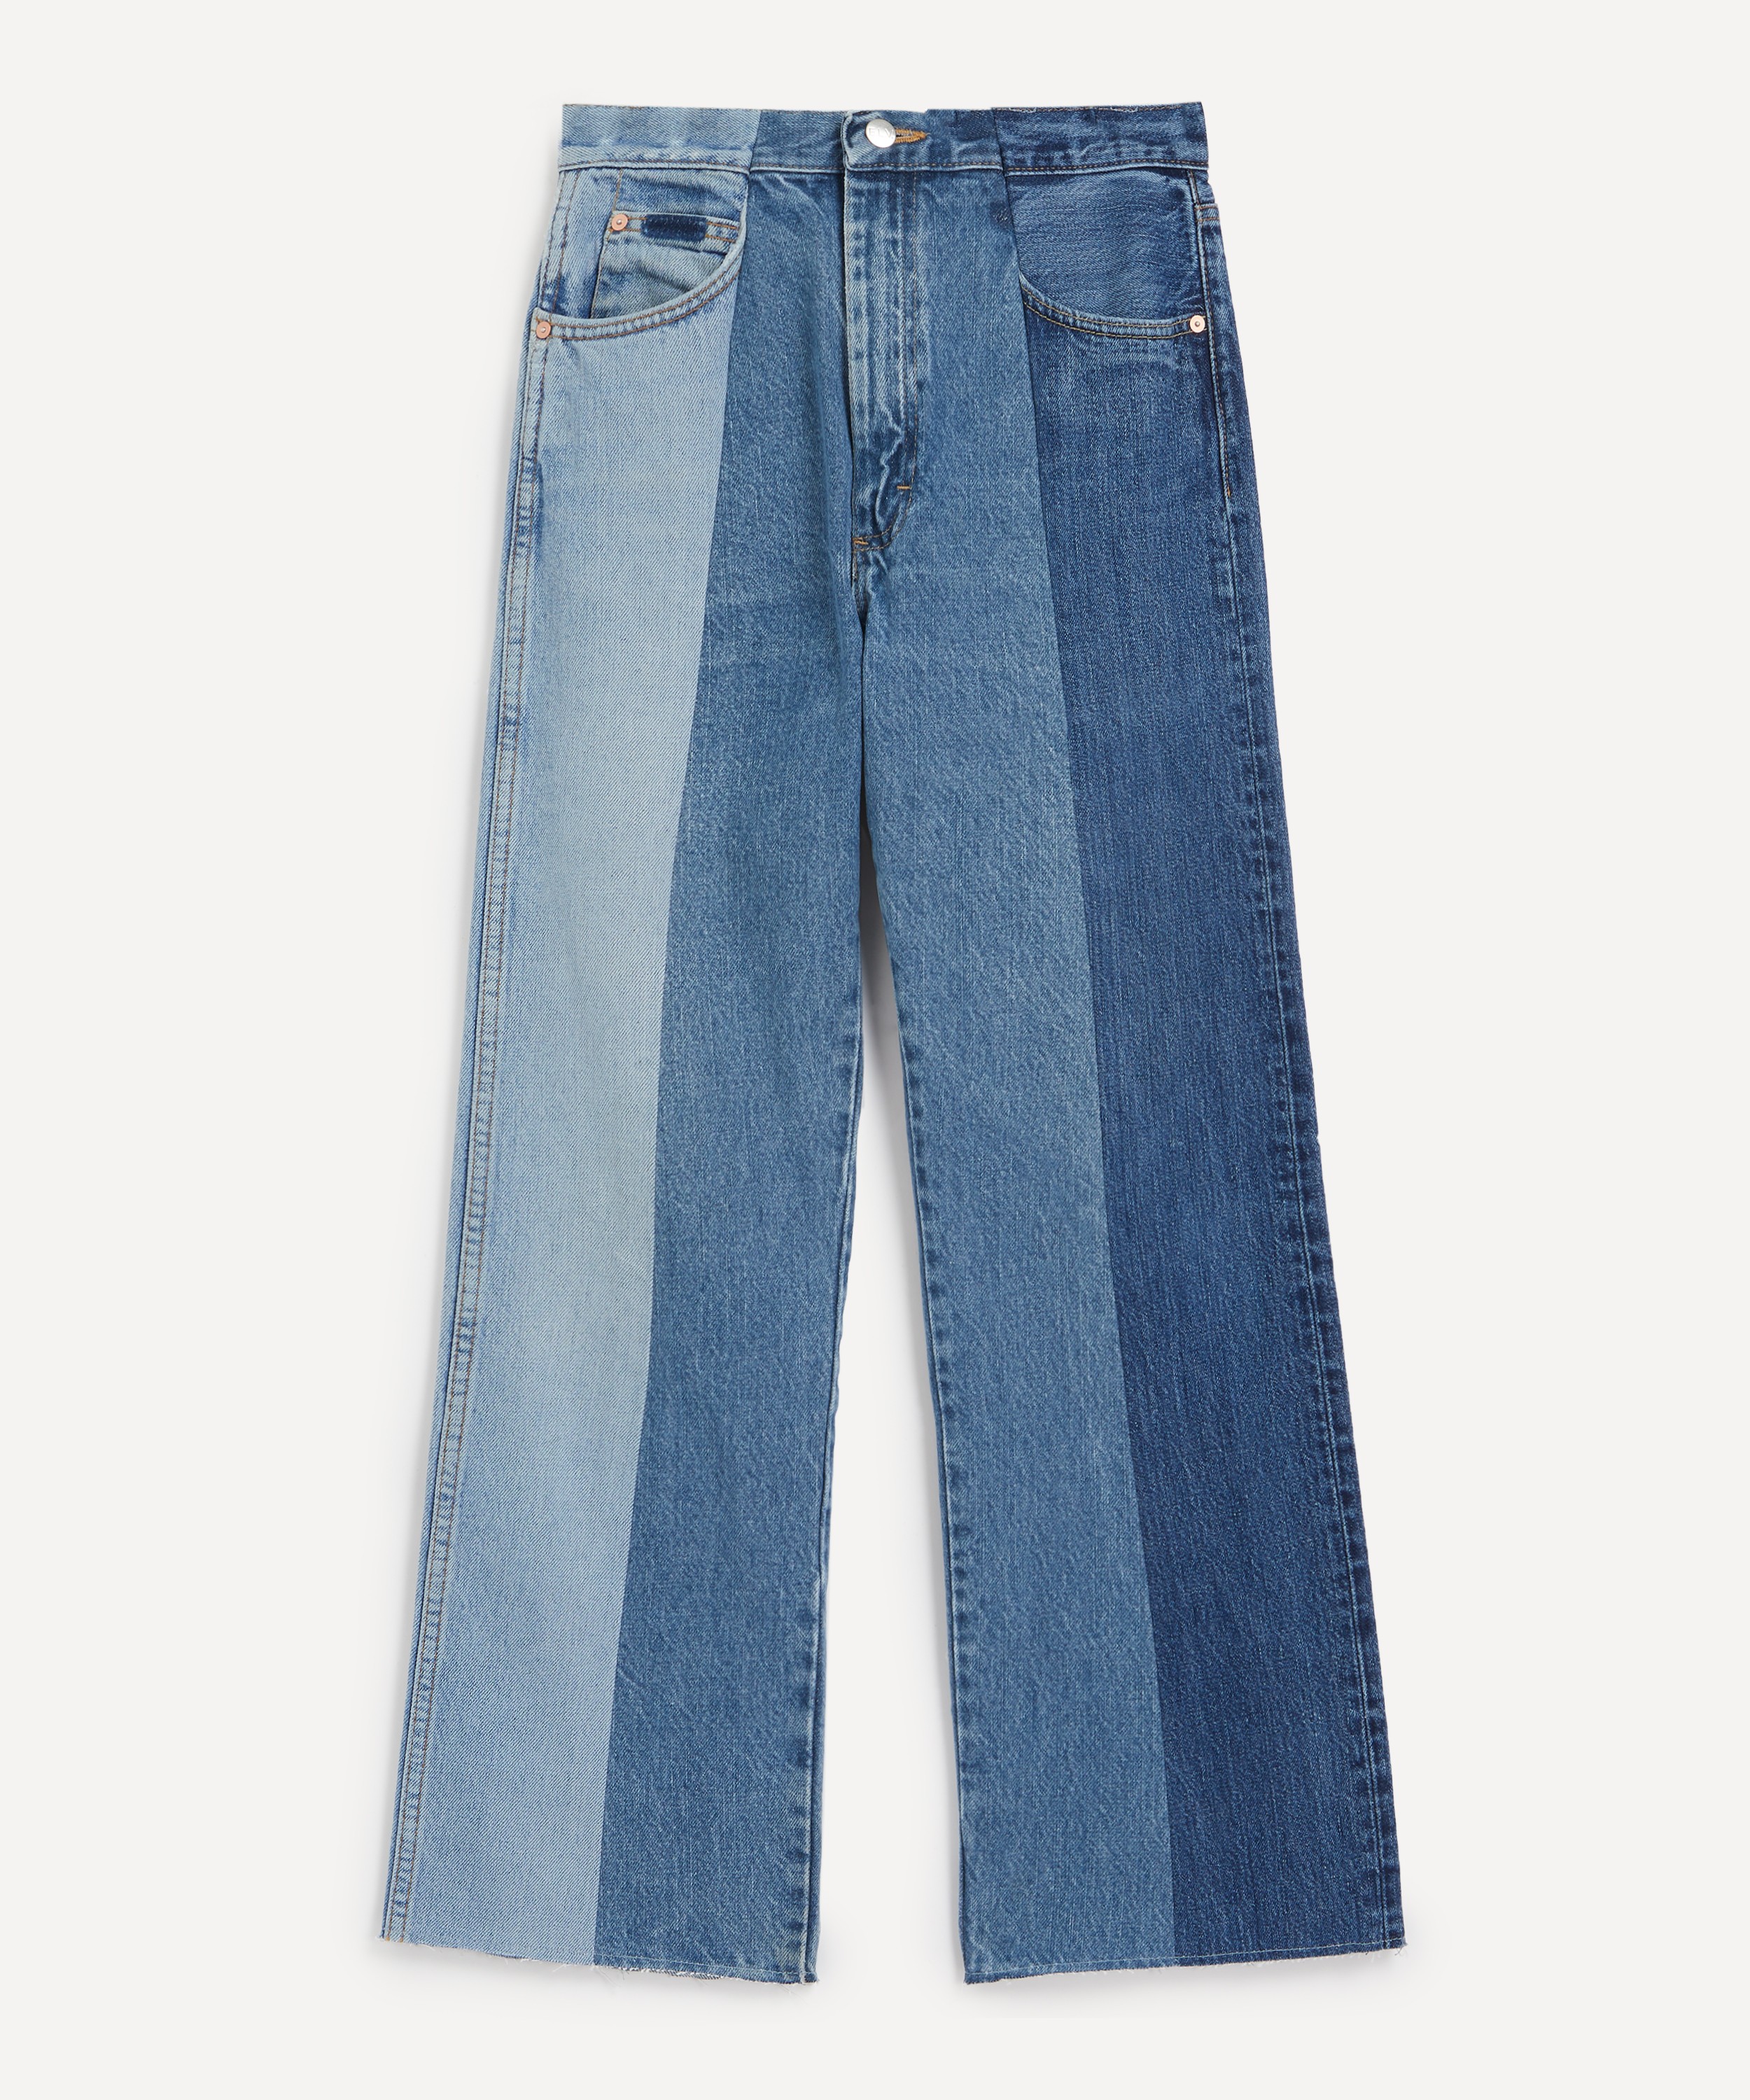 Flared jeans Archives - STYLE DU MONDE